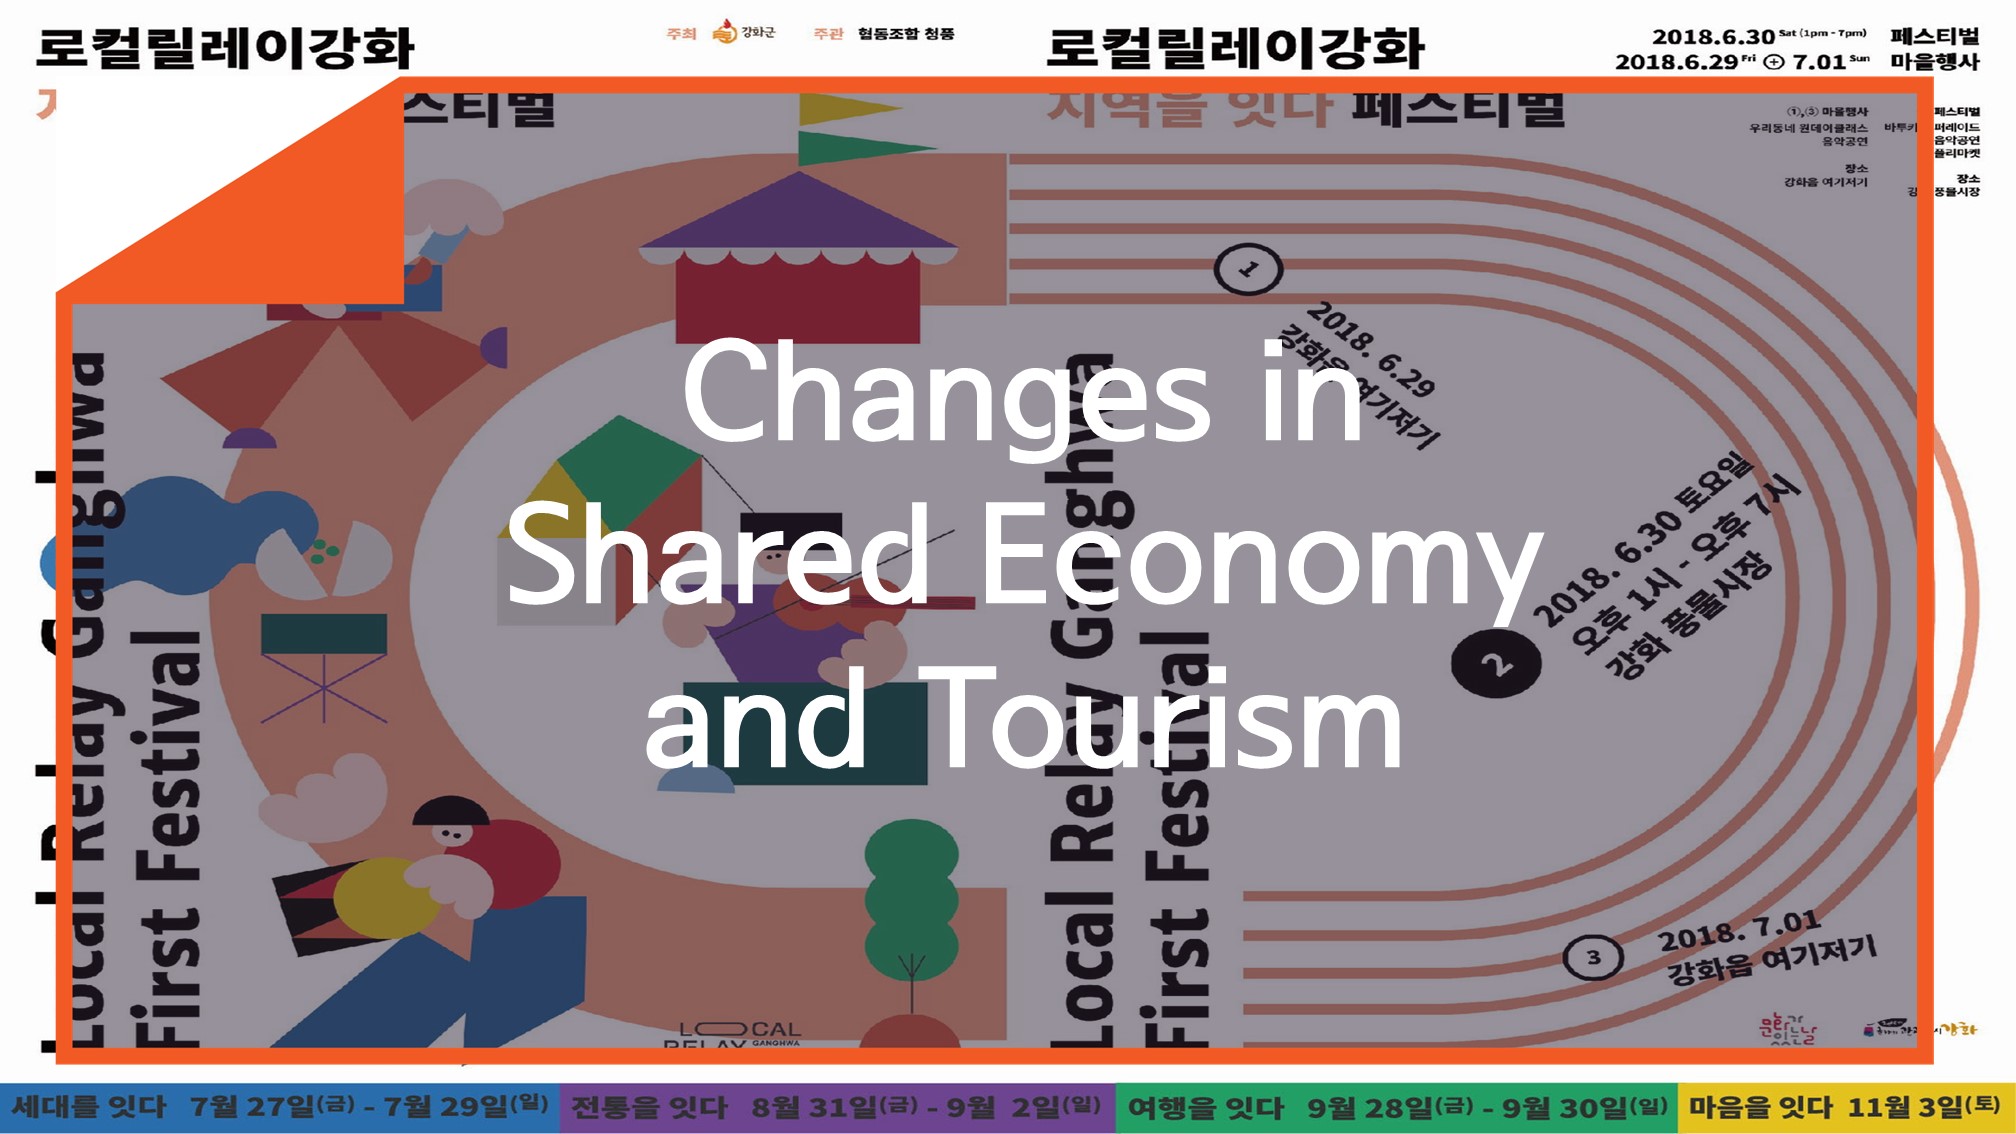 [Resources] Changes in Shared Economy and Tourism